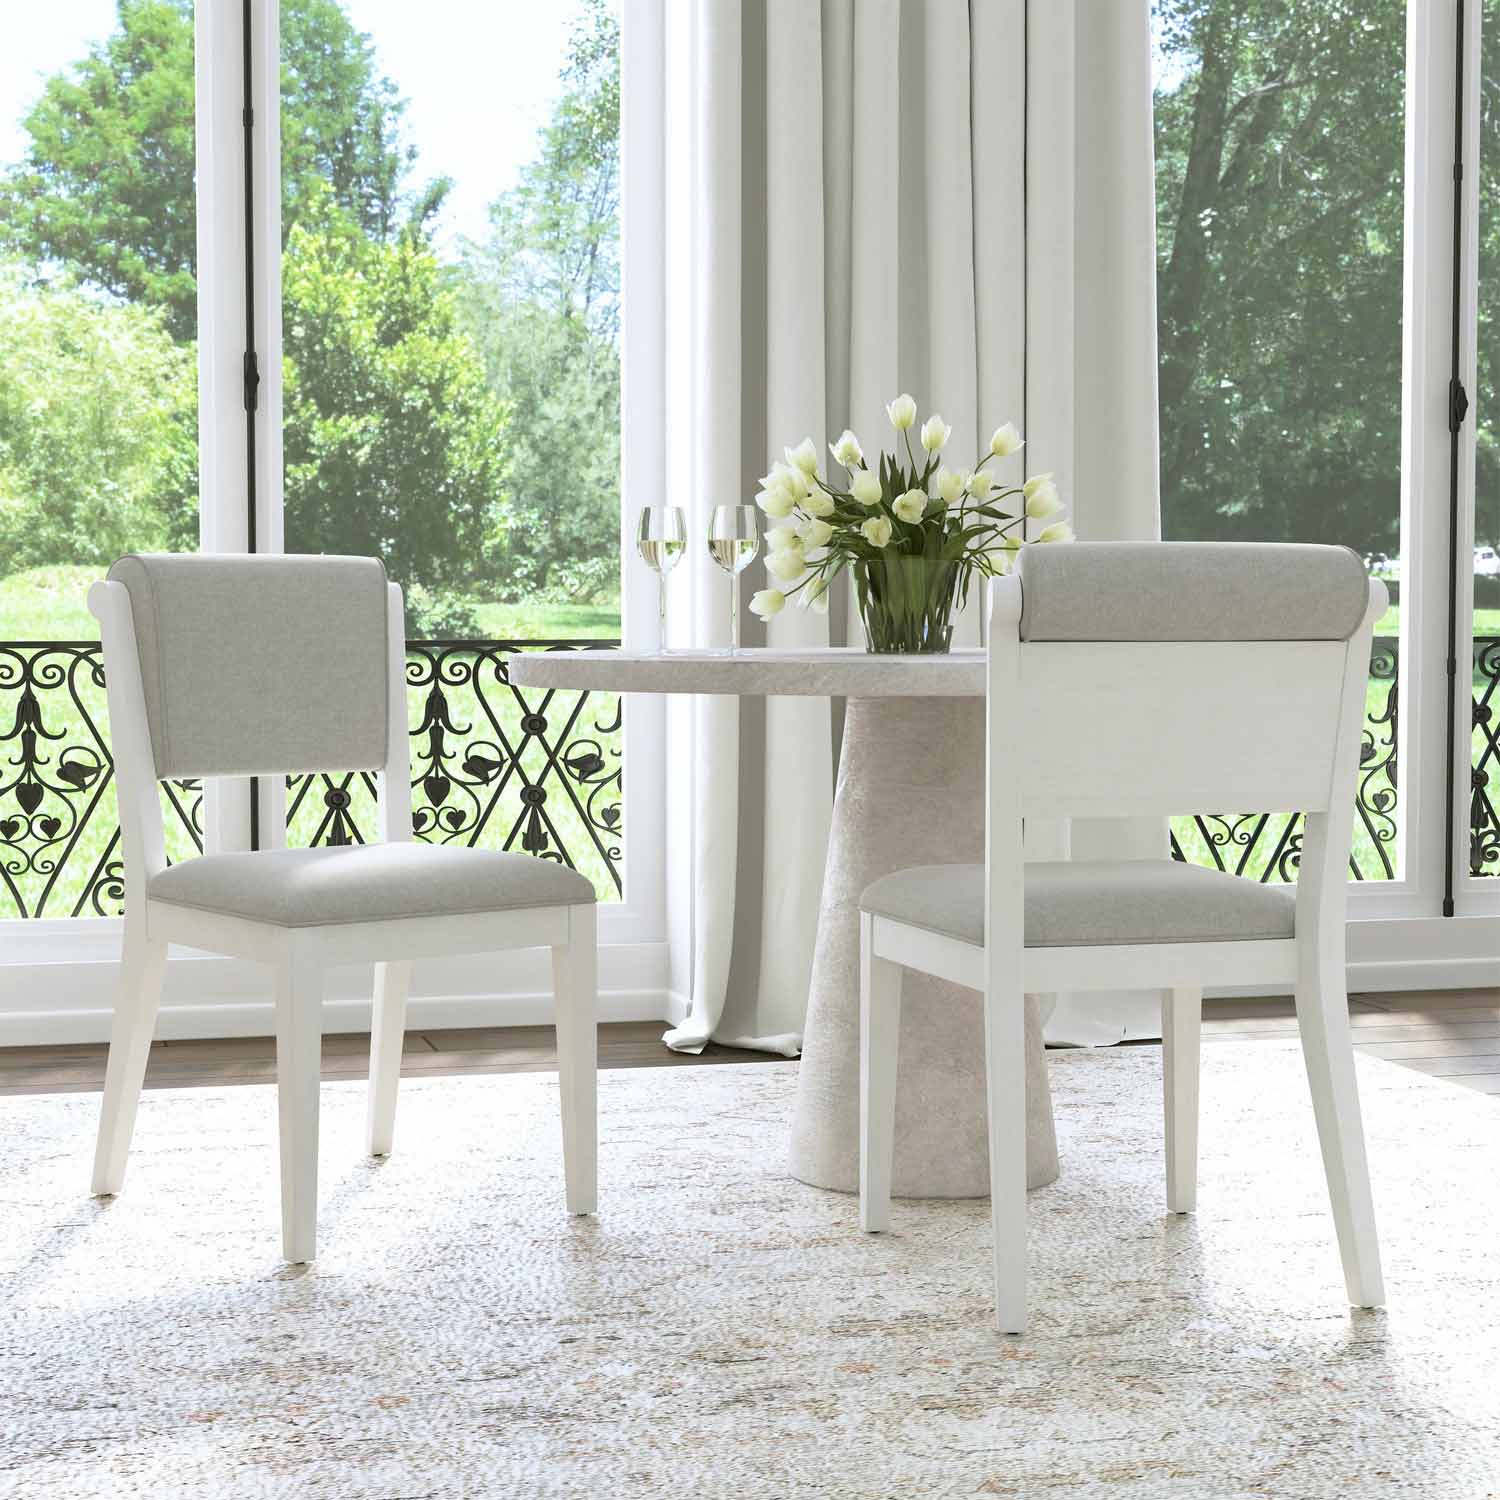 Hillsdale Clarion Wood and Upholstered Dining Chairs - Set of 2 - Sea White